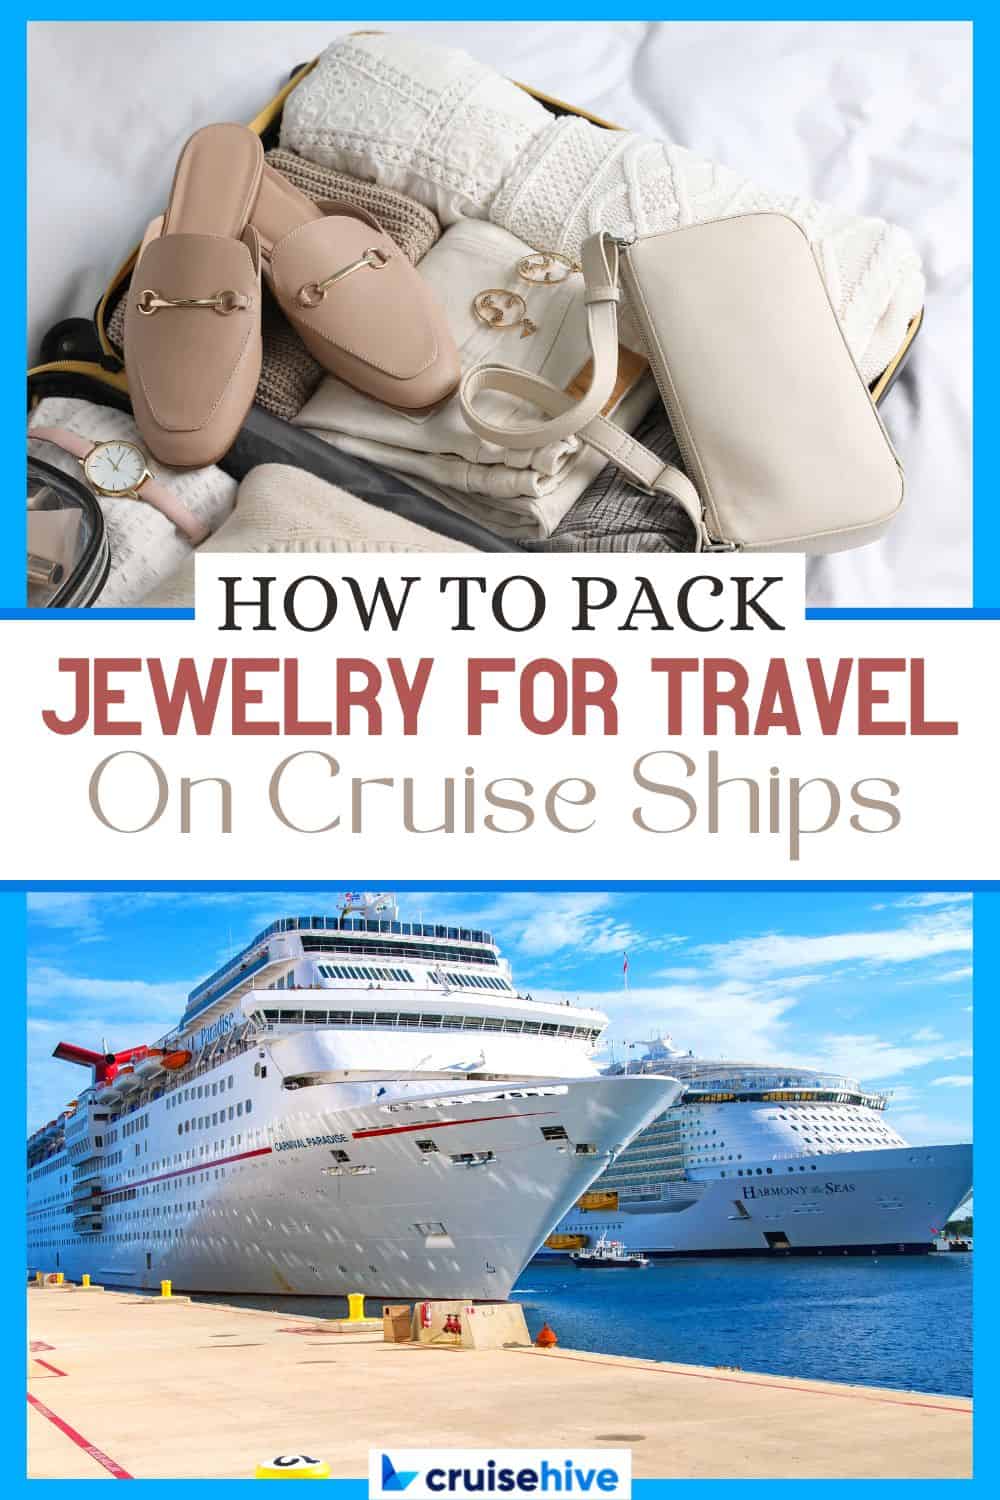 Pack Jewelry for Travel